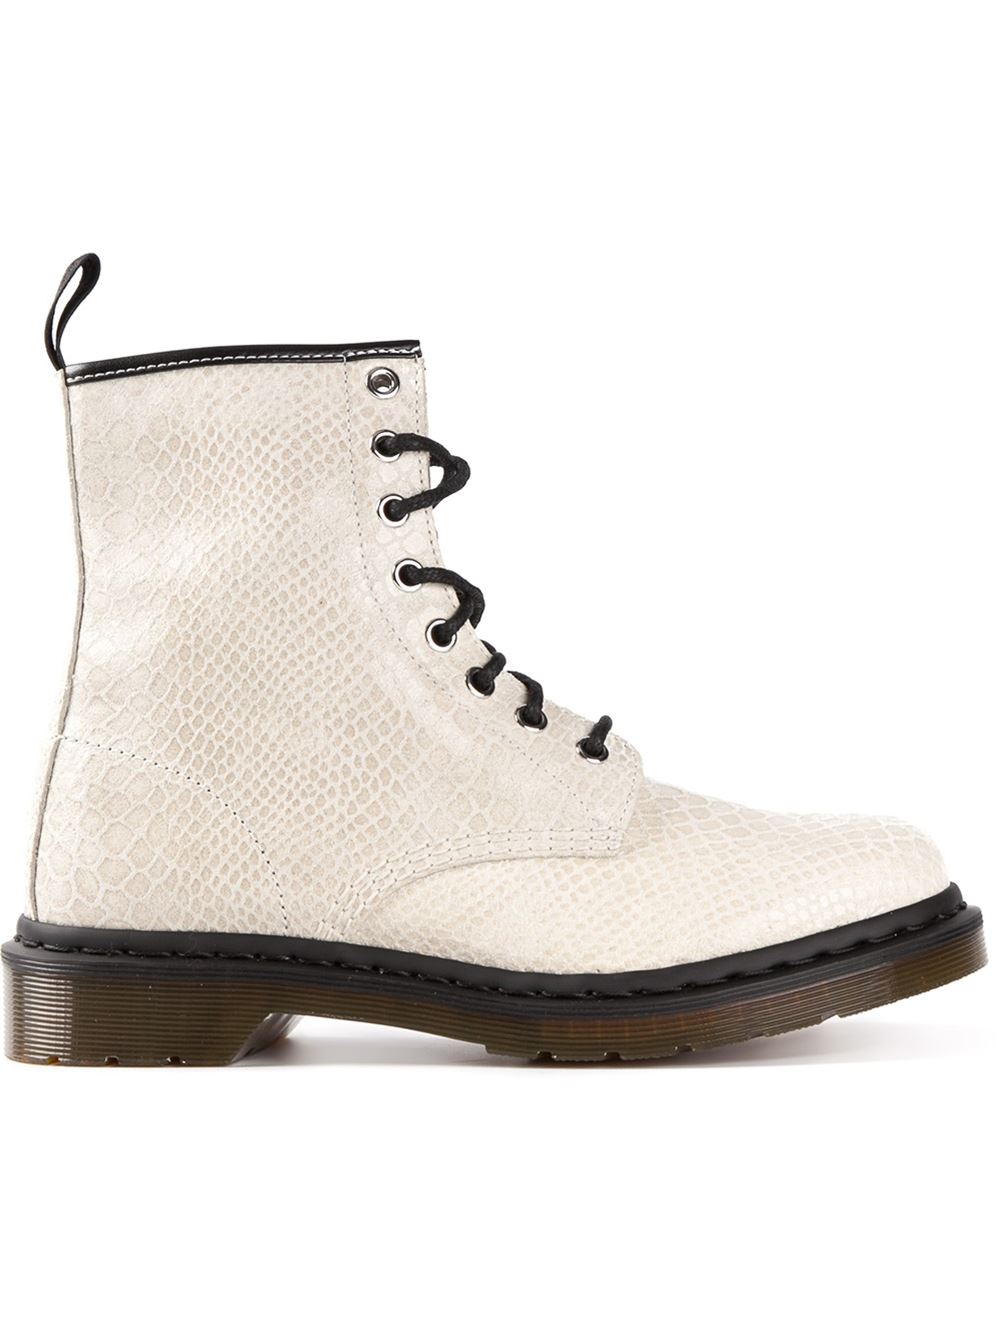 Dr. Martens '1460' Snakeskin Effect Boots in White - Lyst